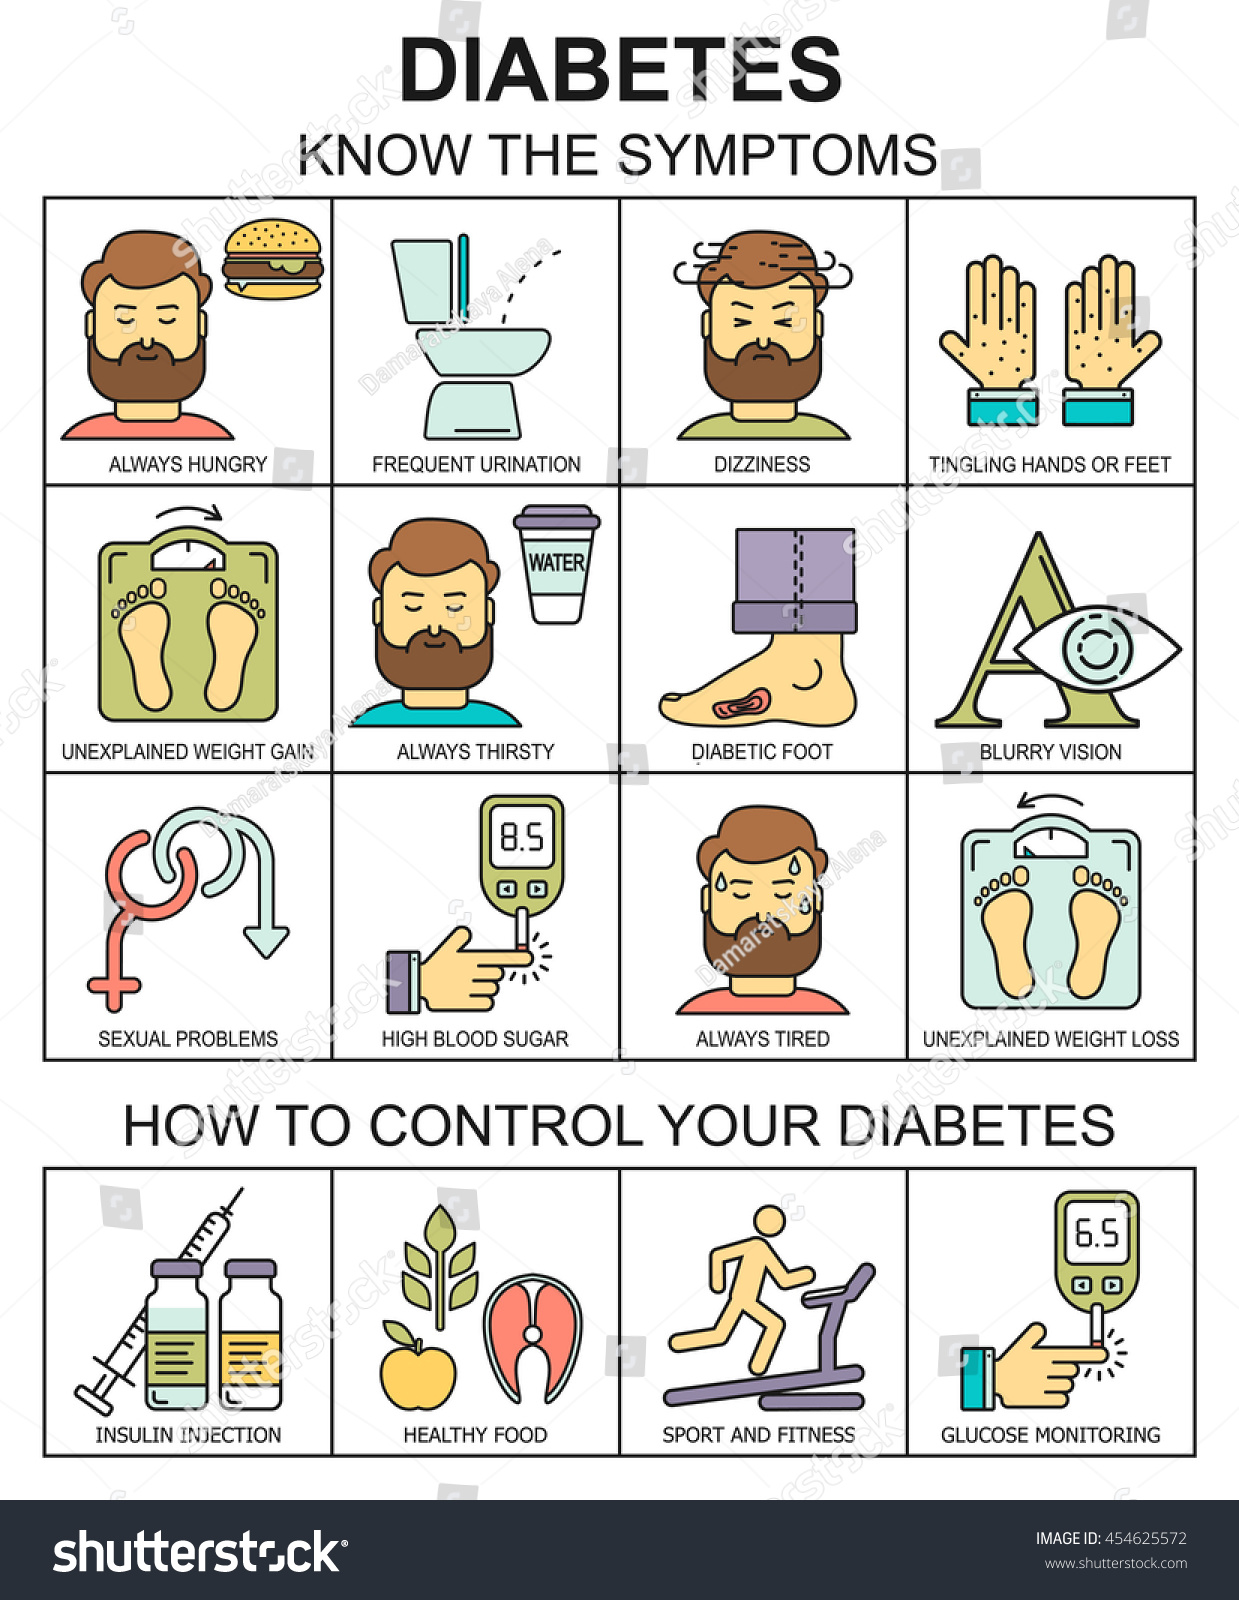 Diabetes Symptoms And Control Background With Colored Line Style Icons Frequent Urination 4323